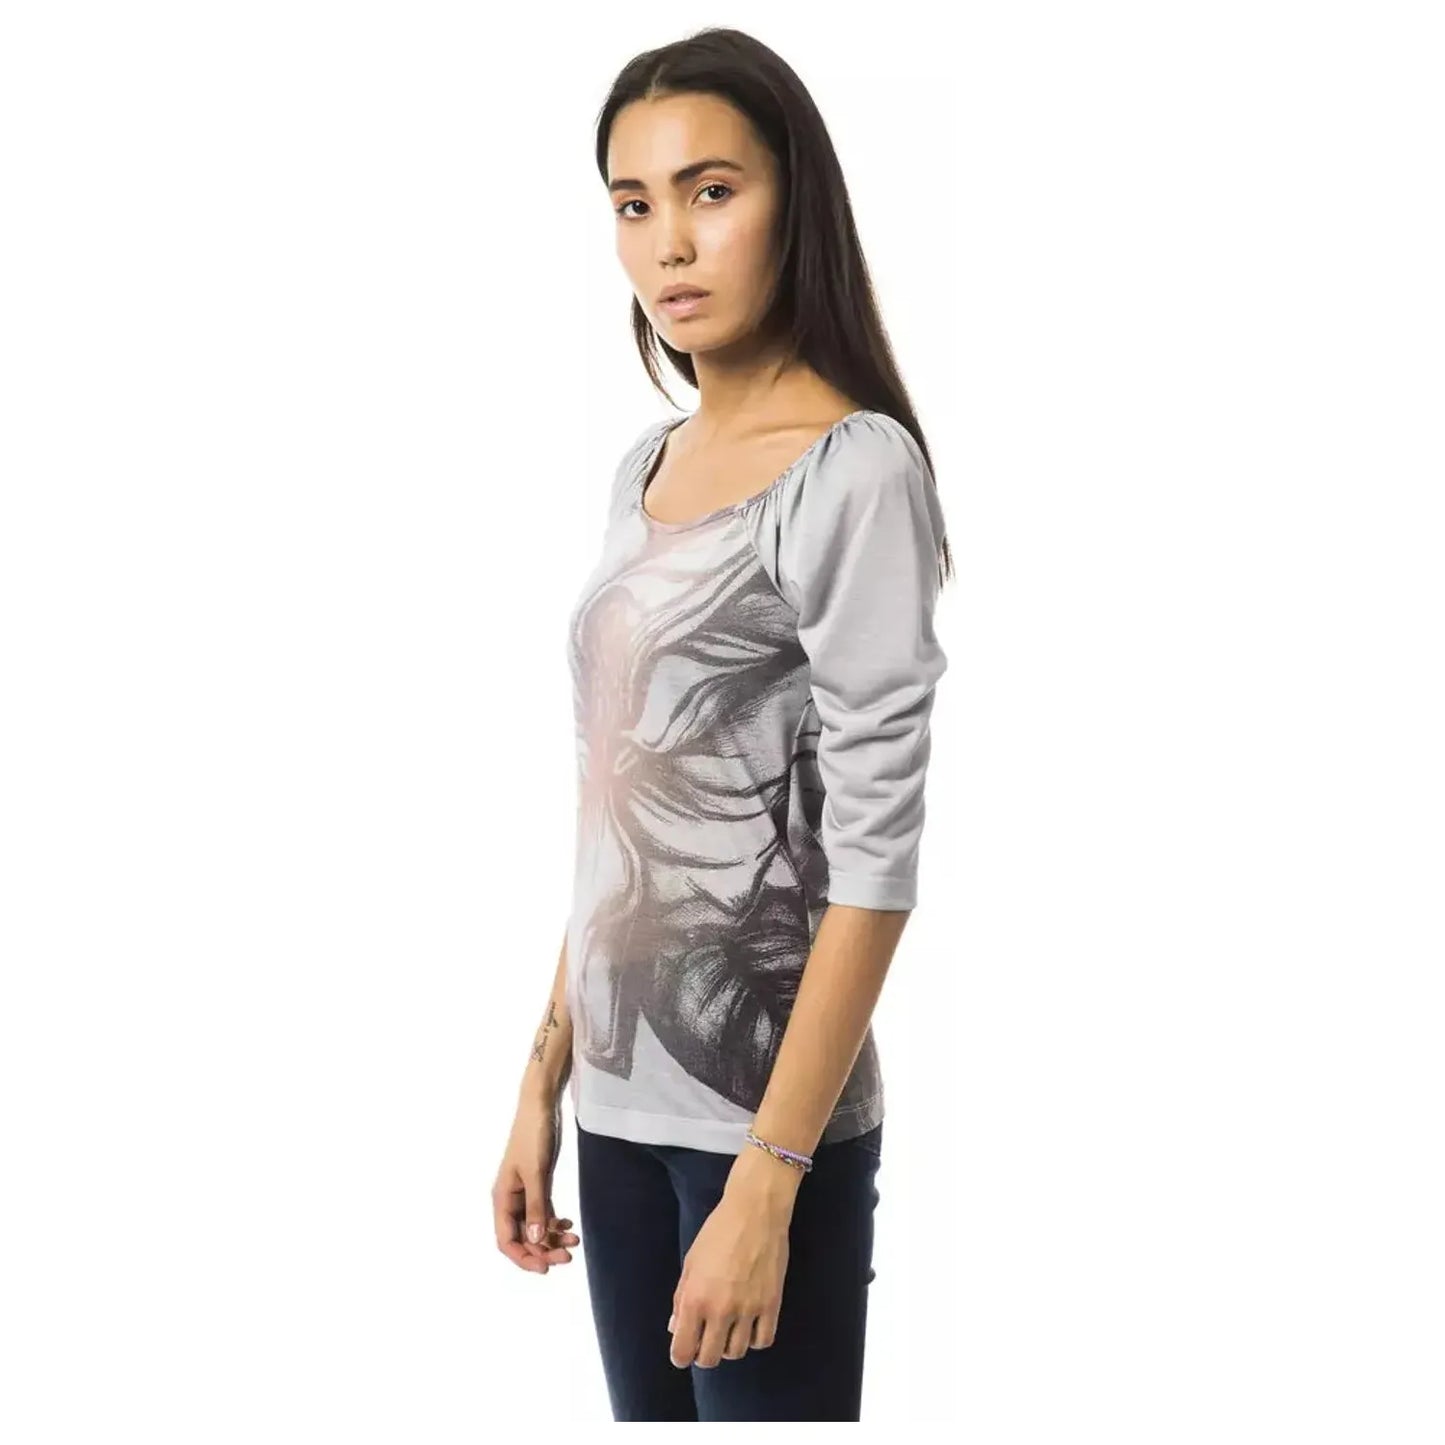 BYBLOS Chic Open Neck Long Sleeve Tee in Gray grigiofumo-tops-t-shirt stock_product_image_17693_244167614-30-99291f3b-901.webp